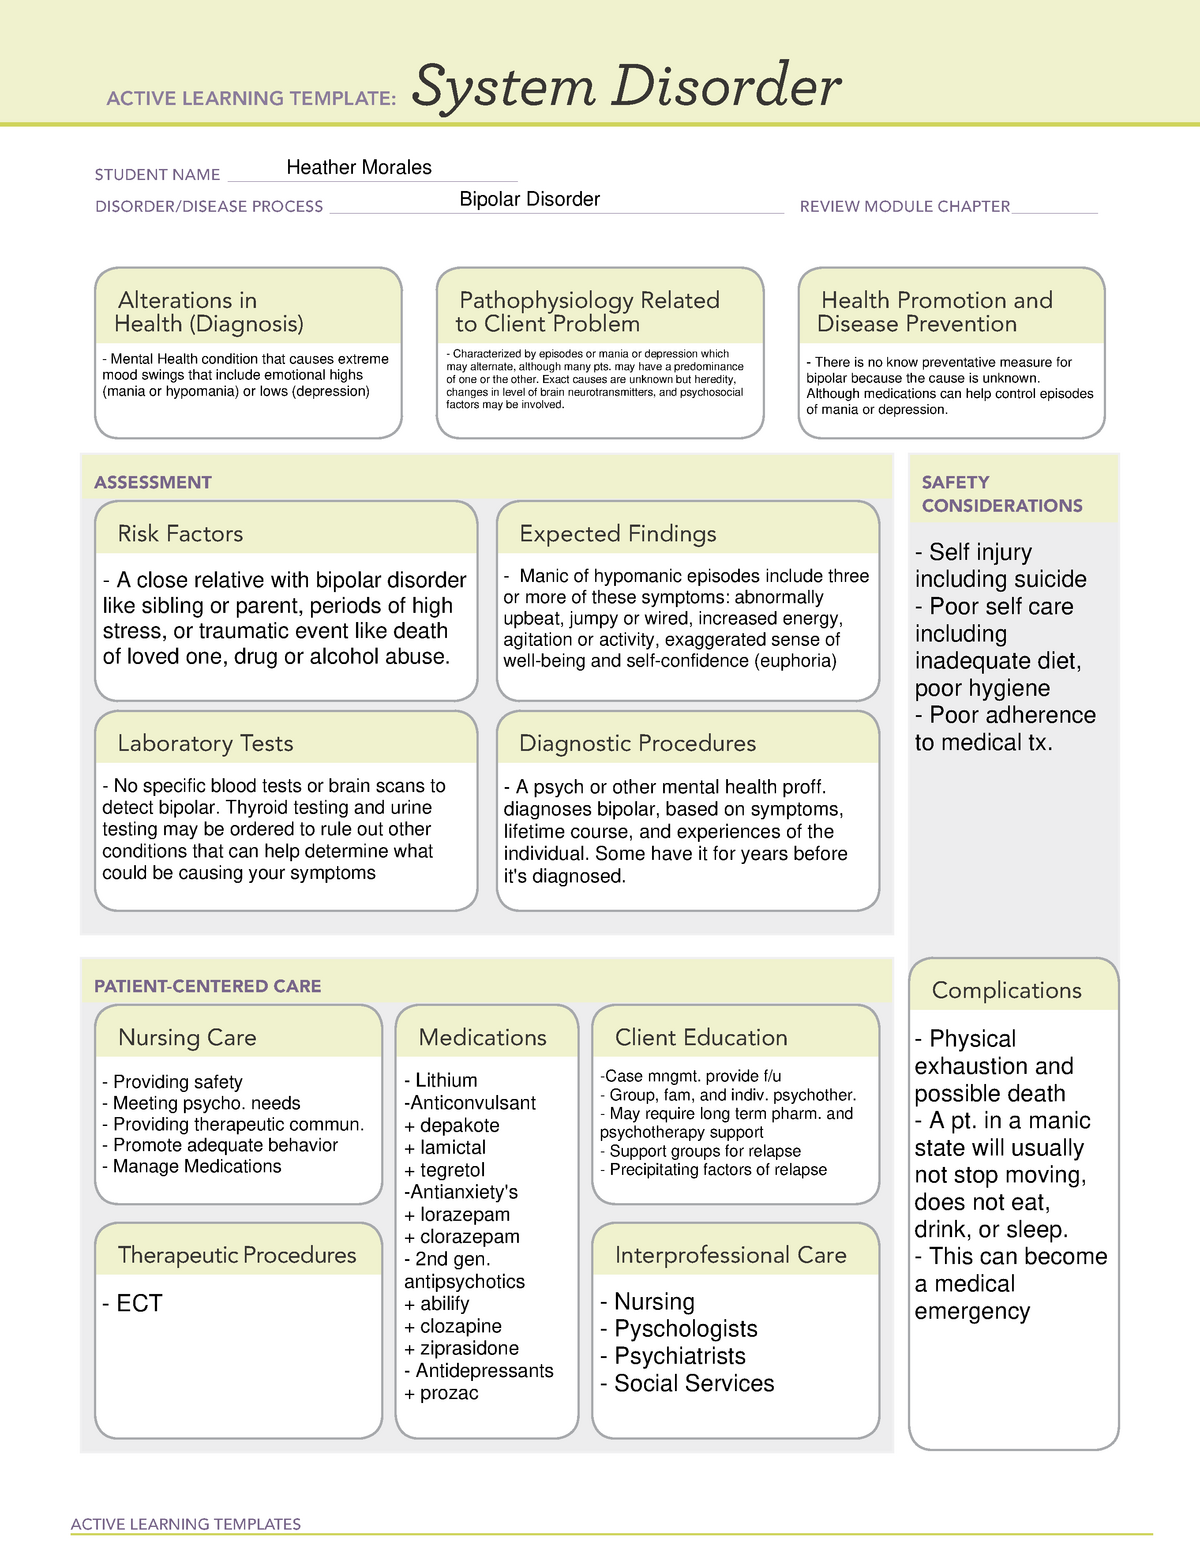 Focused Review Template 1 (Bipolar Disorder) ACTIVE LEARNING